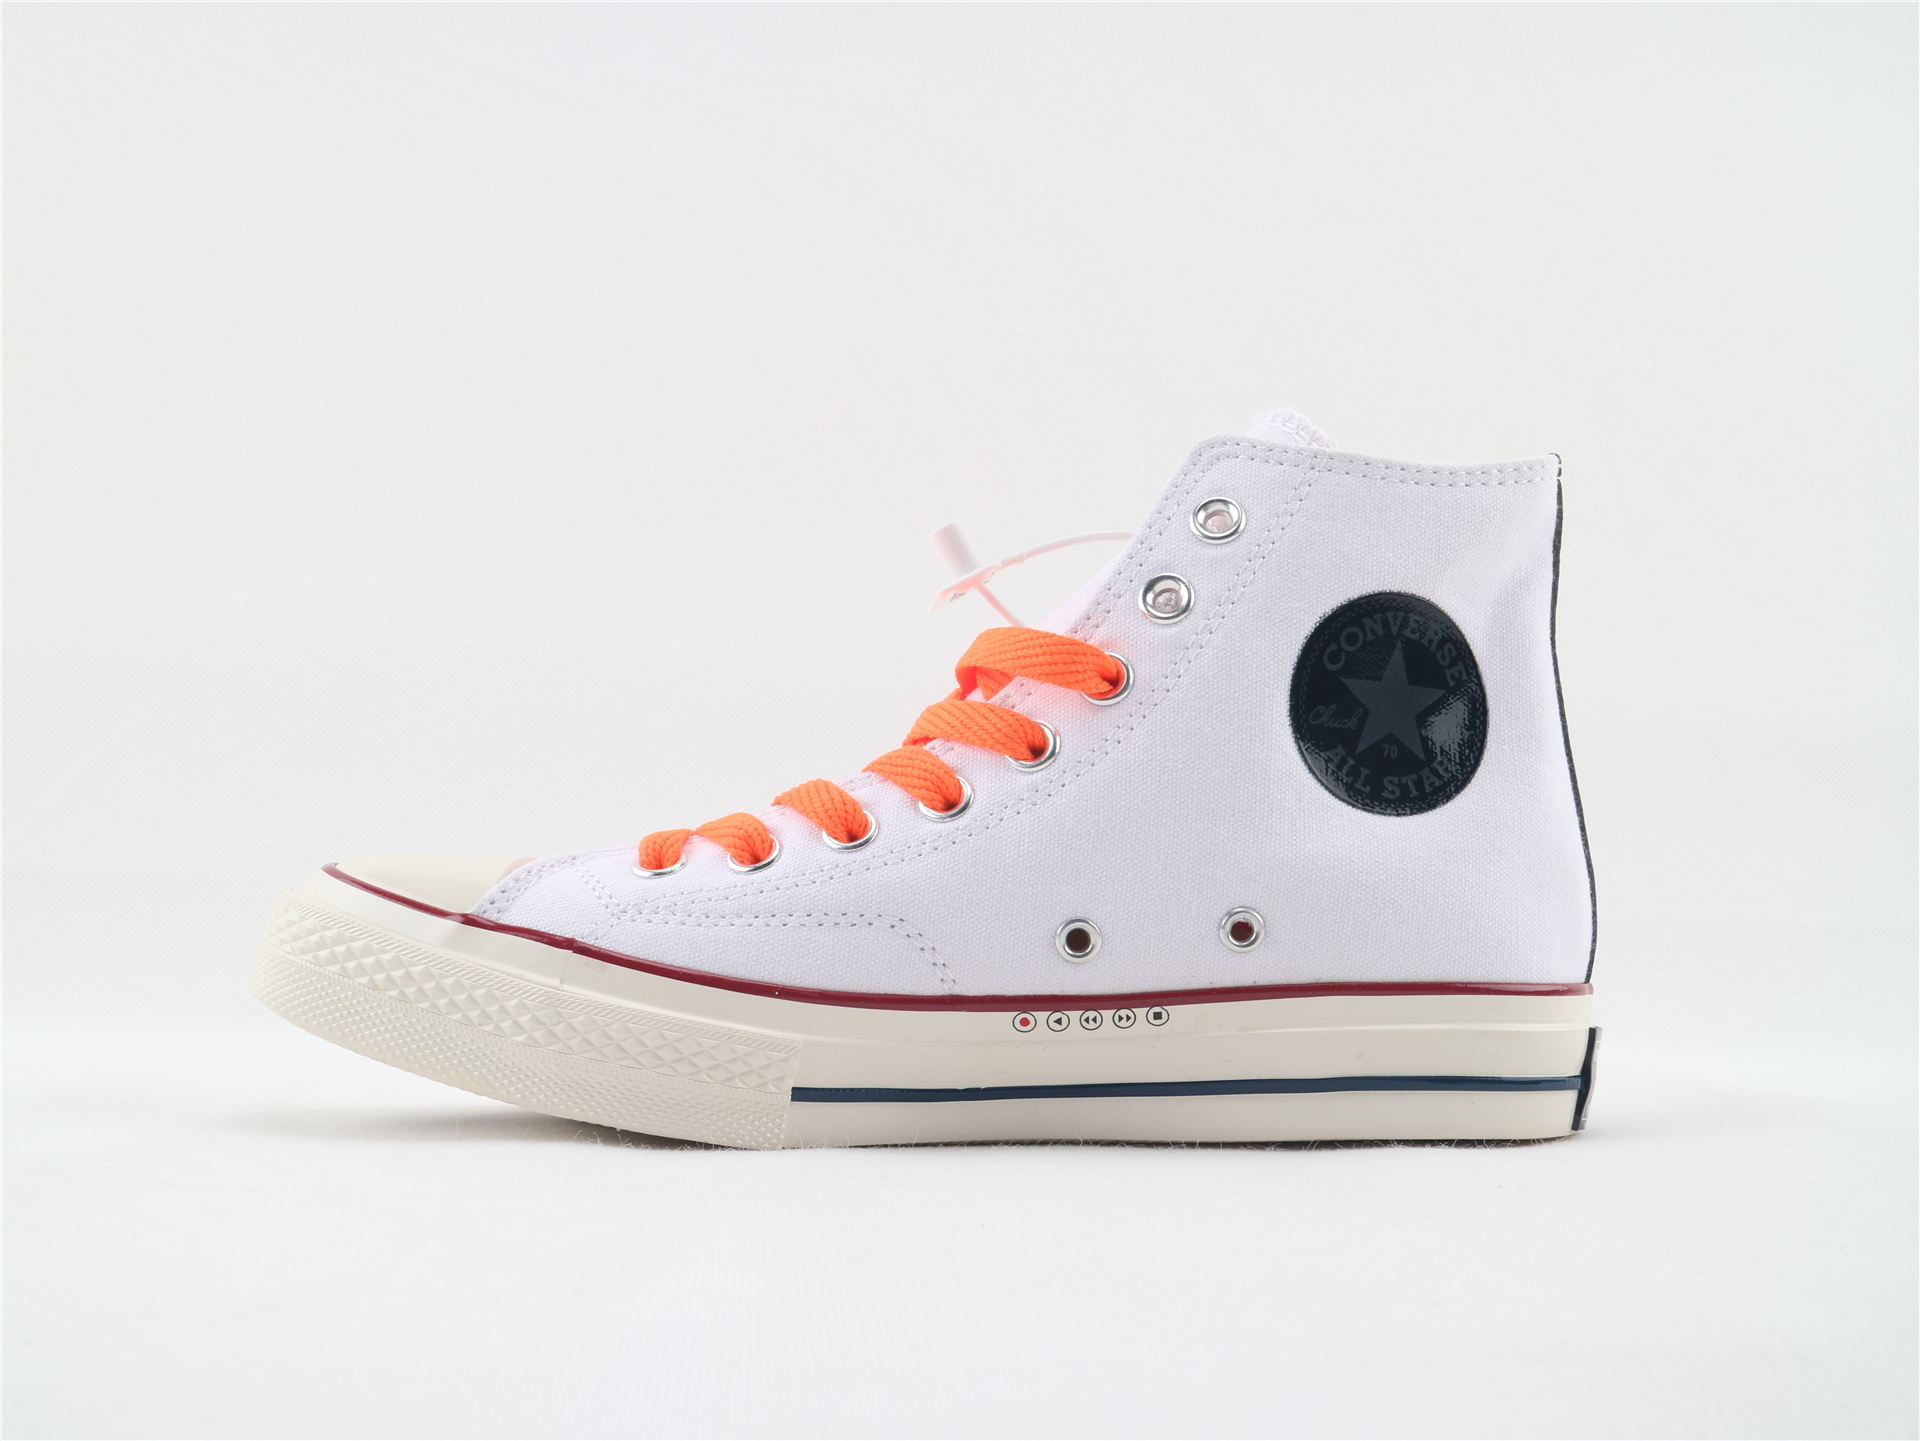 Shoe Palace x Converse Chuck 70 “Boom Box” White For Sale – The Sole Line